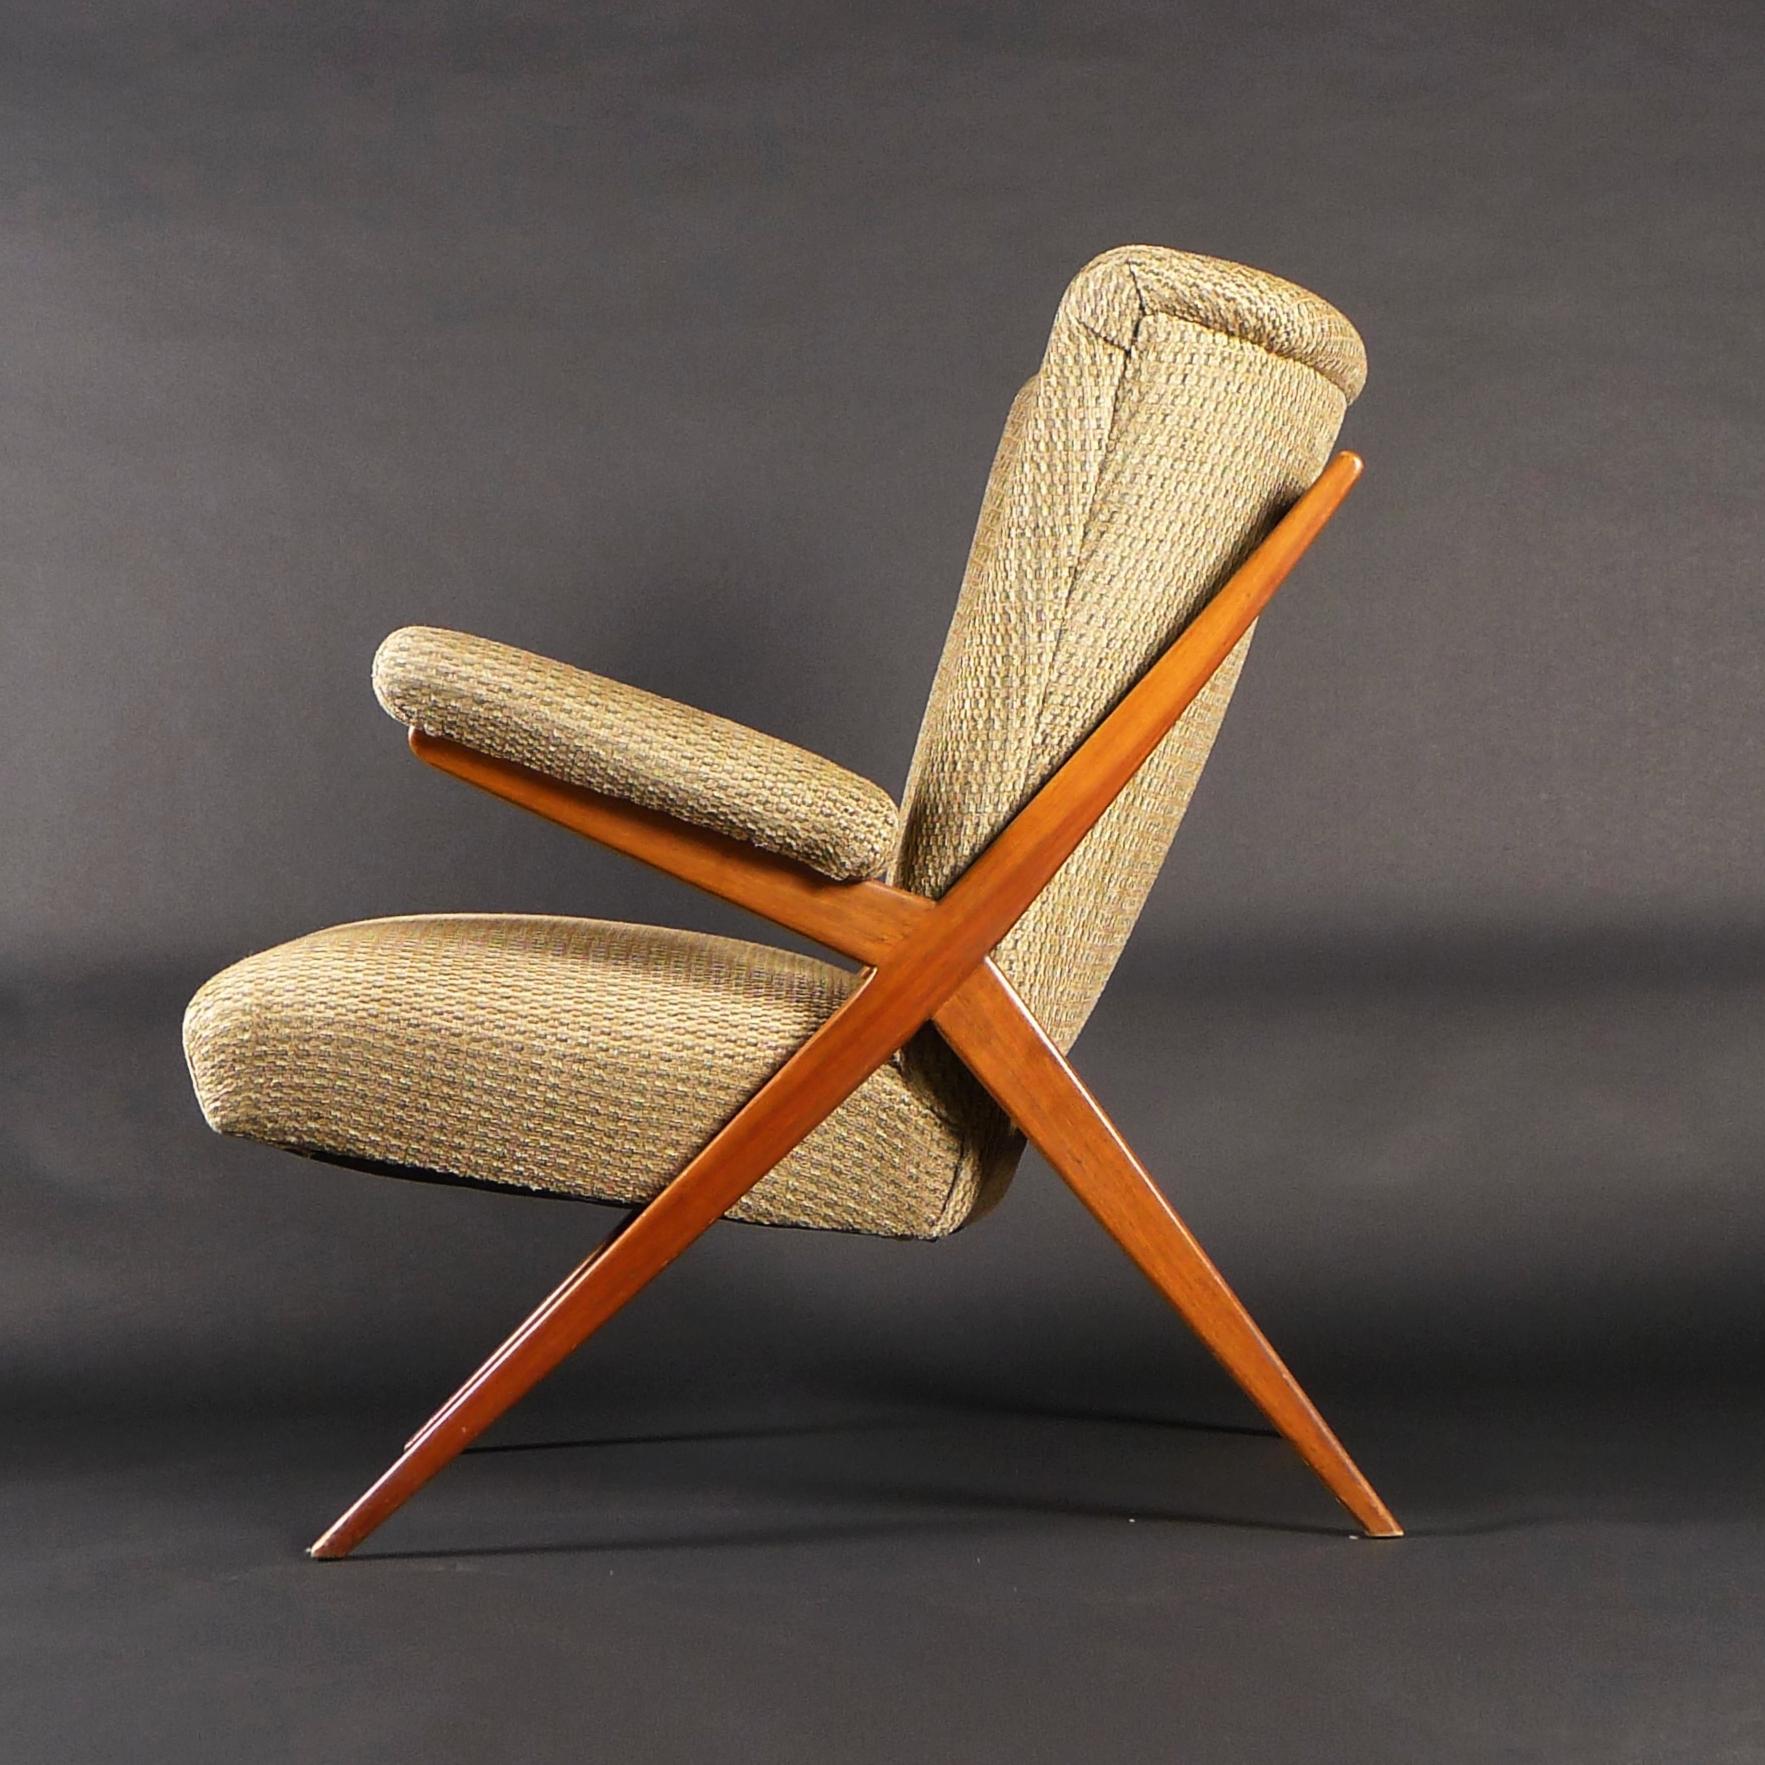 Franco Albini for Cassina, Lounge Chair, model CA832
with Italian walnut X frame and upholstered seat, back and arms with buttons to the curved back
89cm high, 69cm wide, 85cm deep, seat height 44cm

Literature: Repertorio 1950-1980, Gramigna, pg. 54